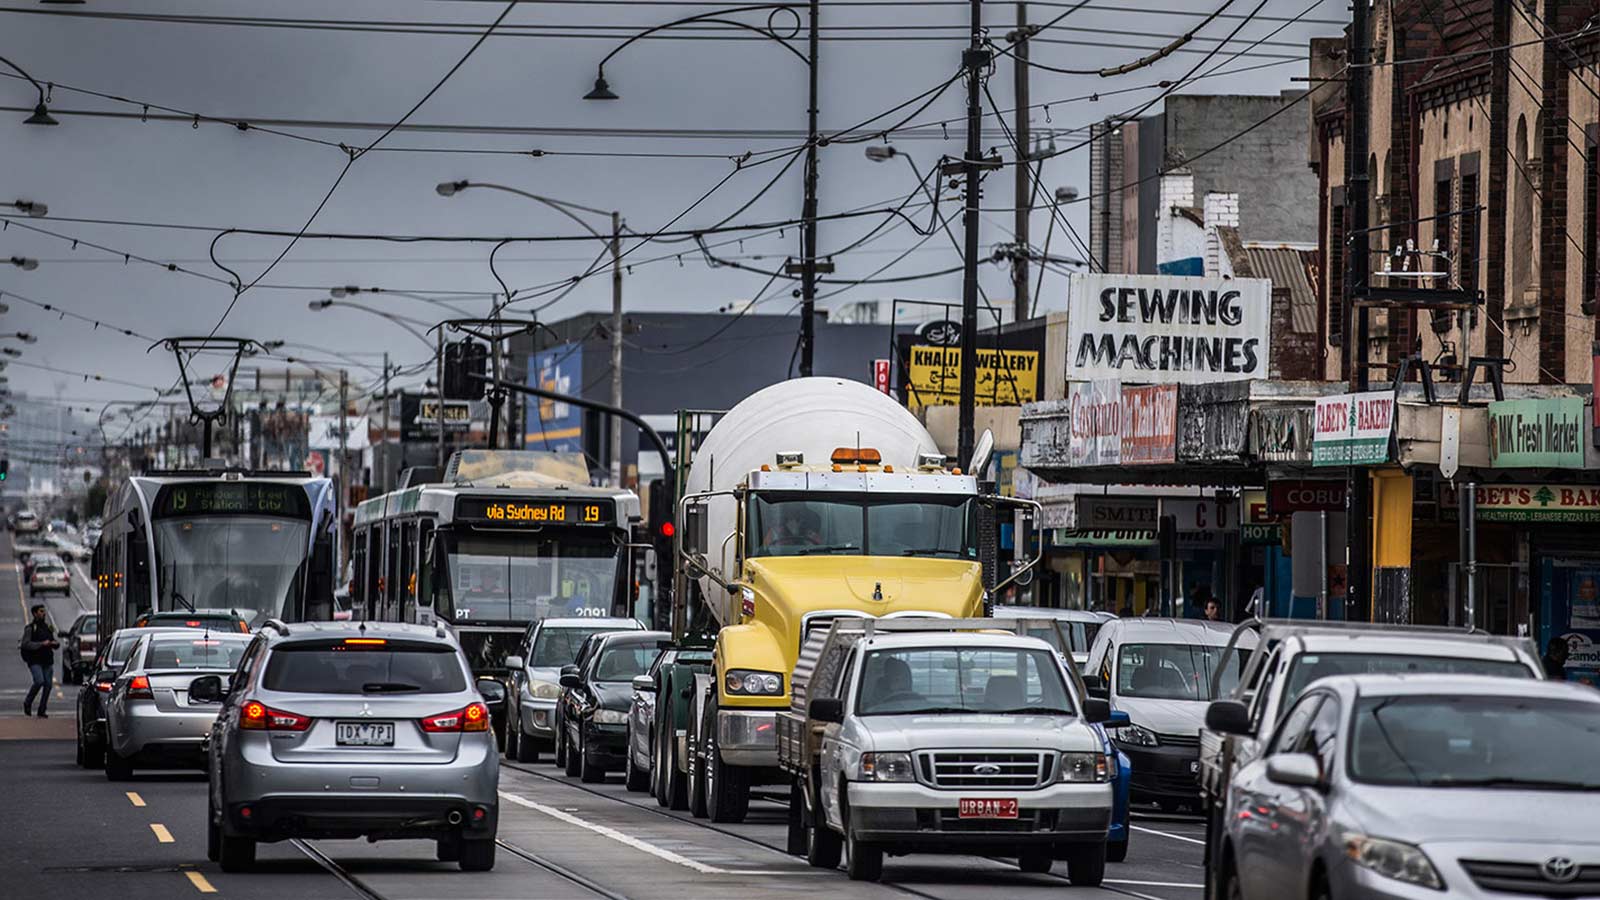 Traffic congestion on a busy shopping street with cars, trams and a yellow cement truck.